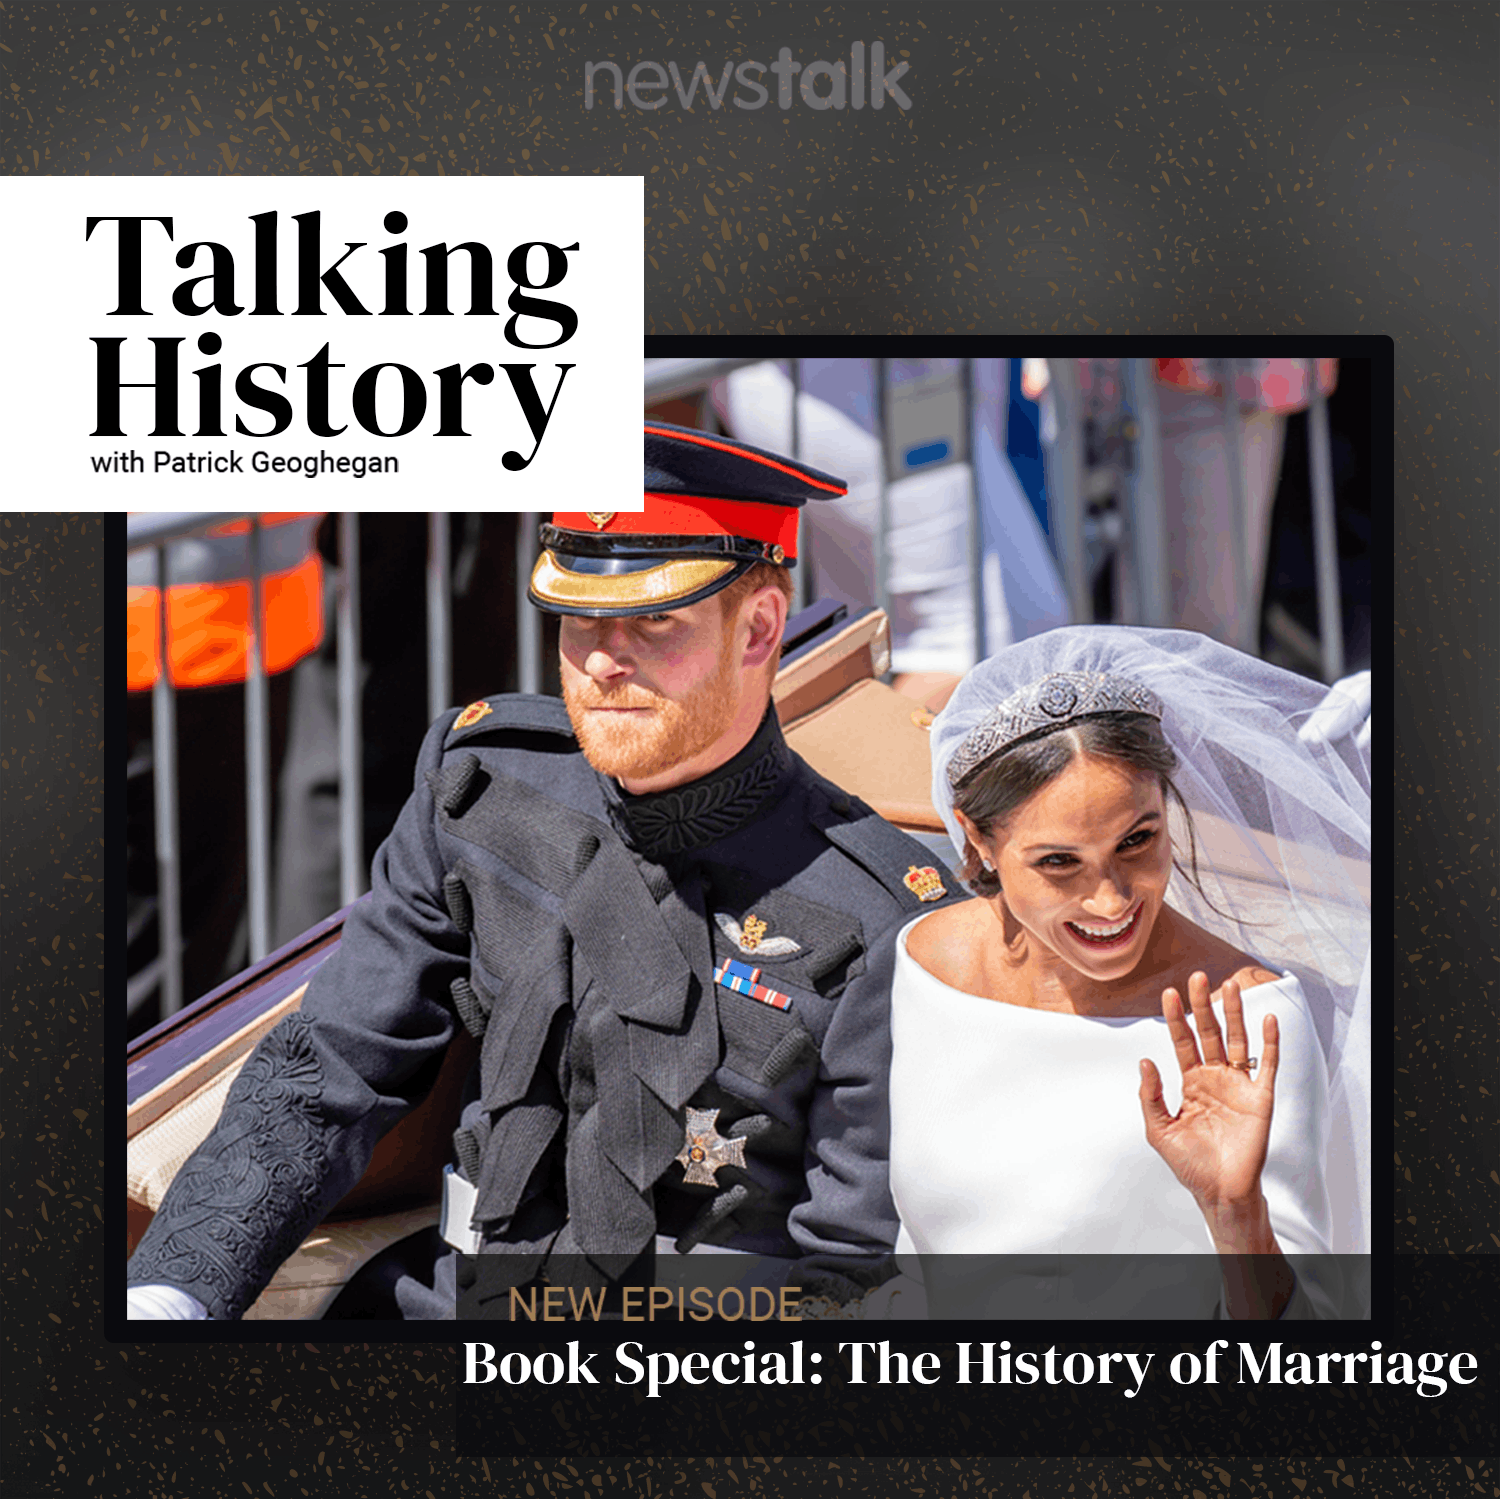 Books Special: The History of Marriage